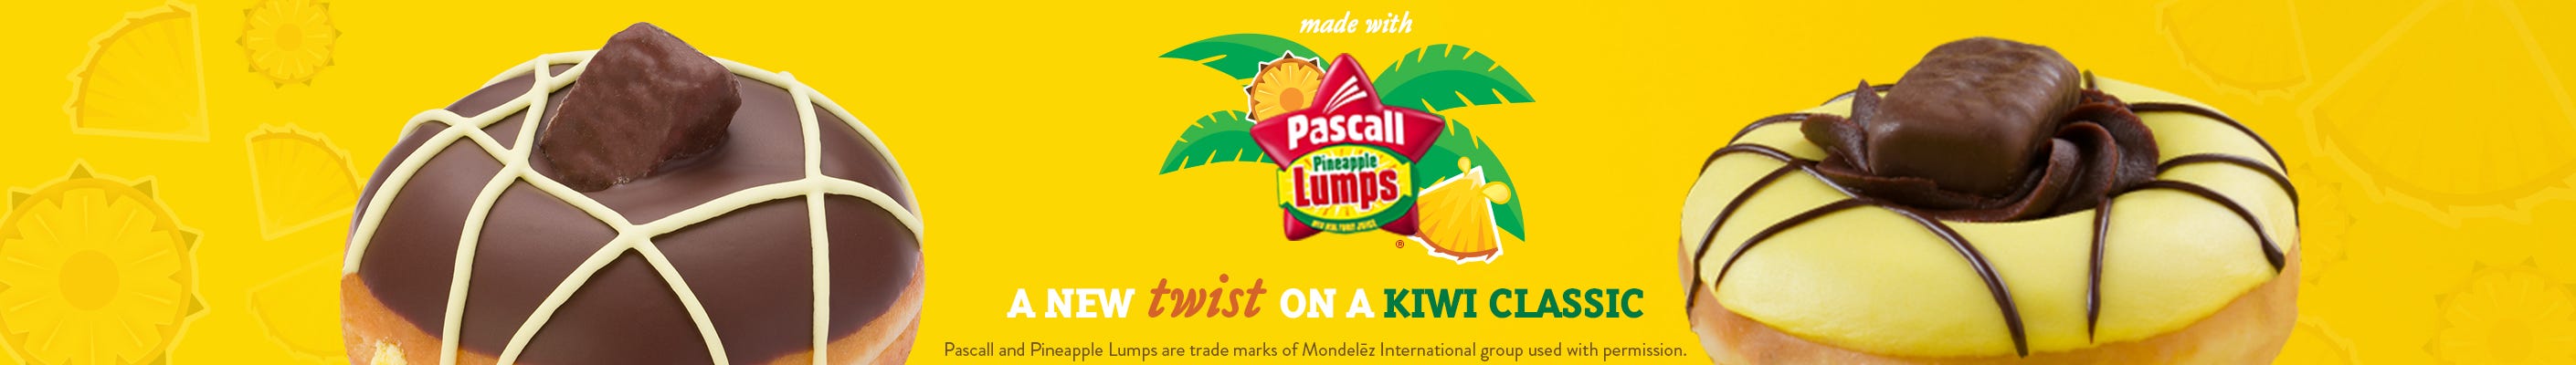 Pascall Pineapple Lumps colouring and logo - banner image featuring yellow background and 2 pineapple lumps inspred doughnuts in chocolate and pineapple icing.